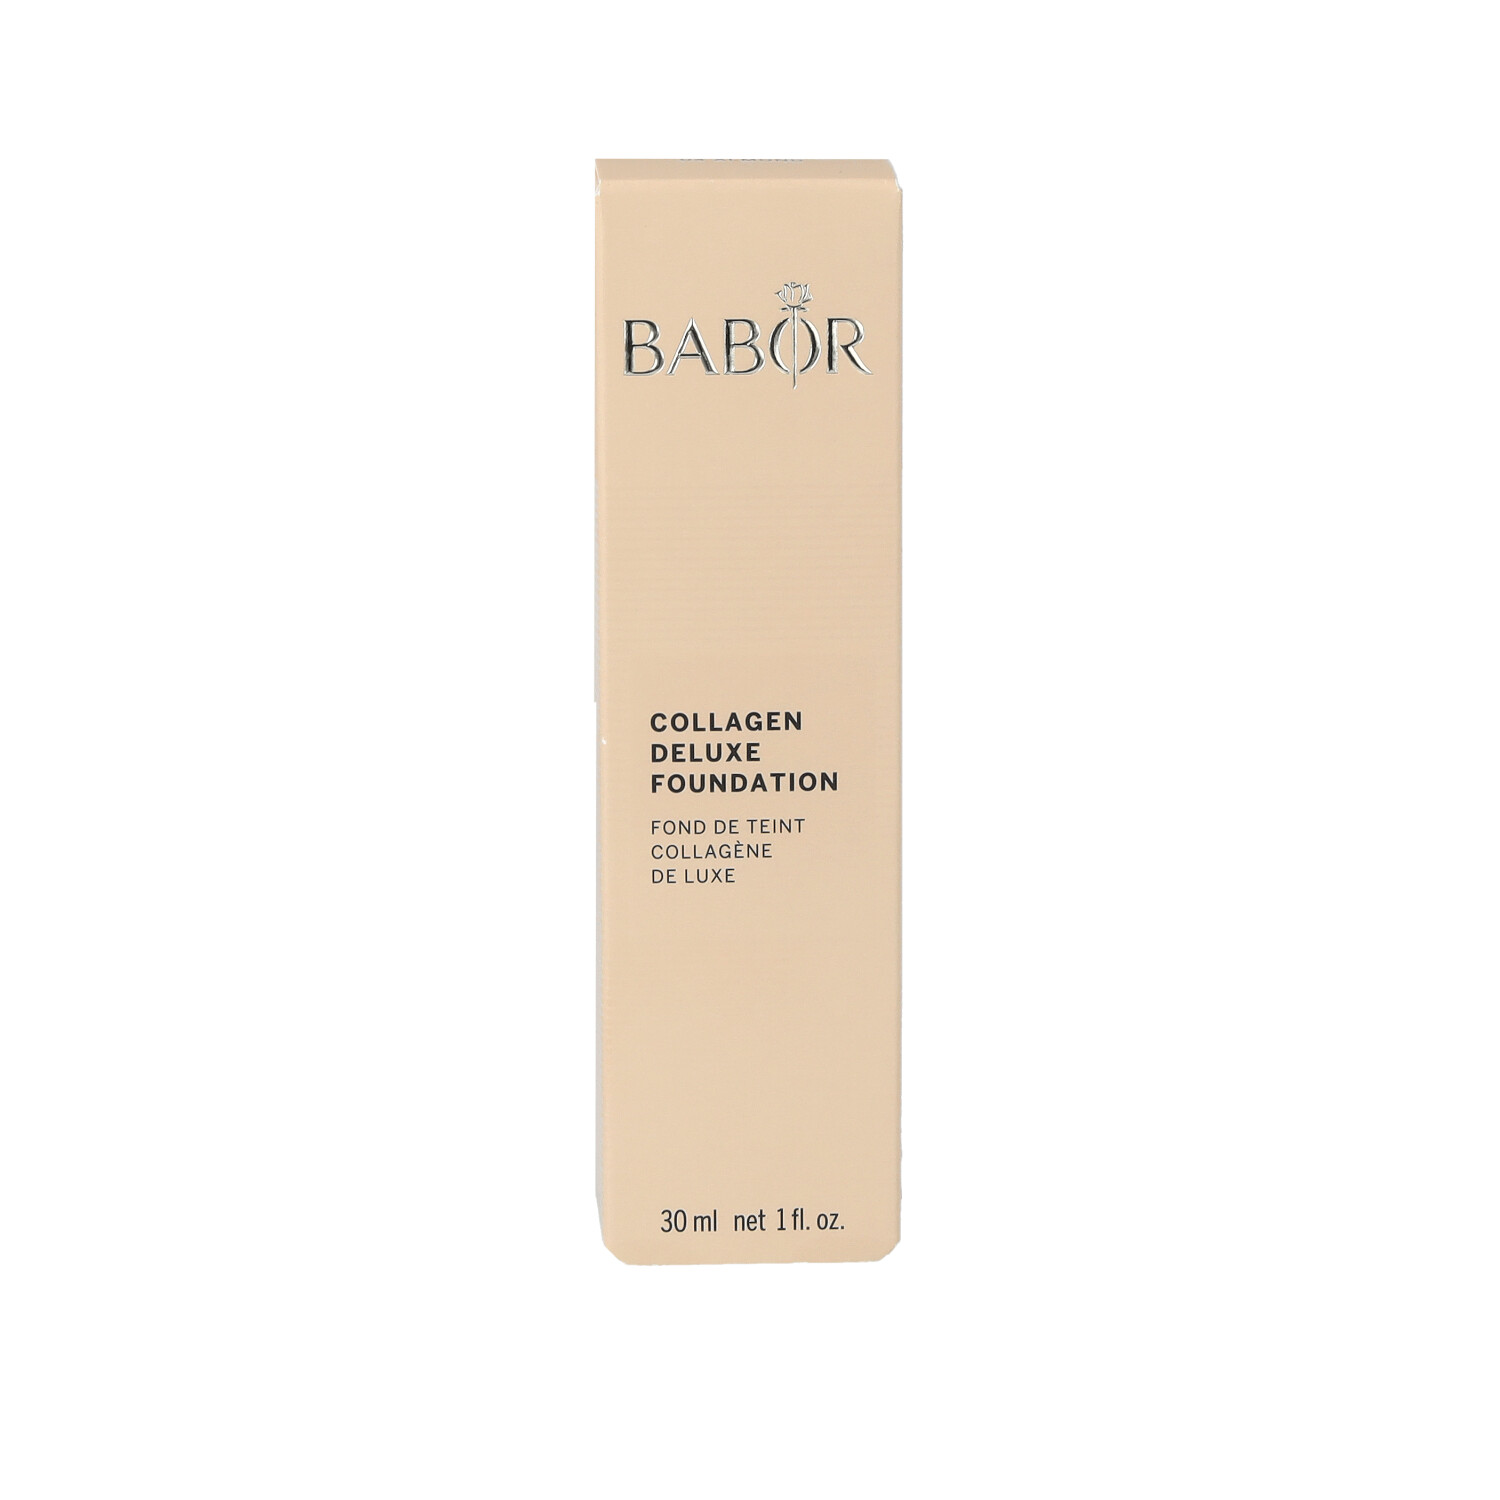 BABOR Collagen Deluxe Foundation 04 almond